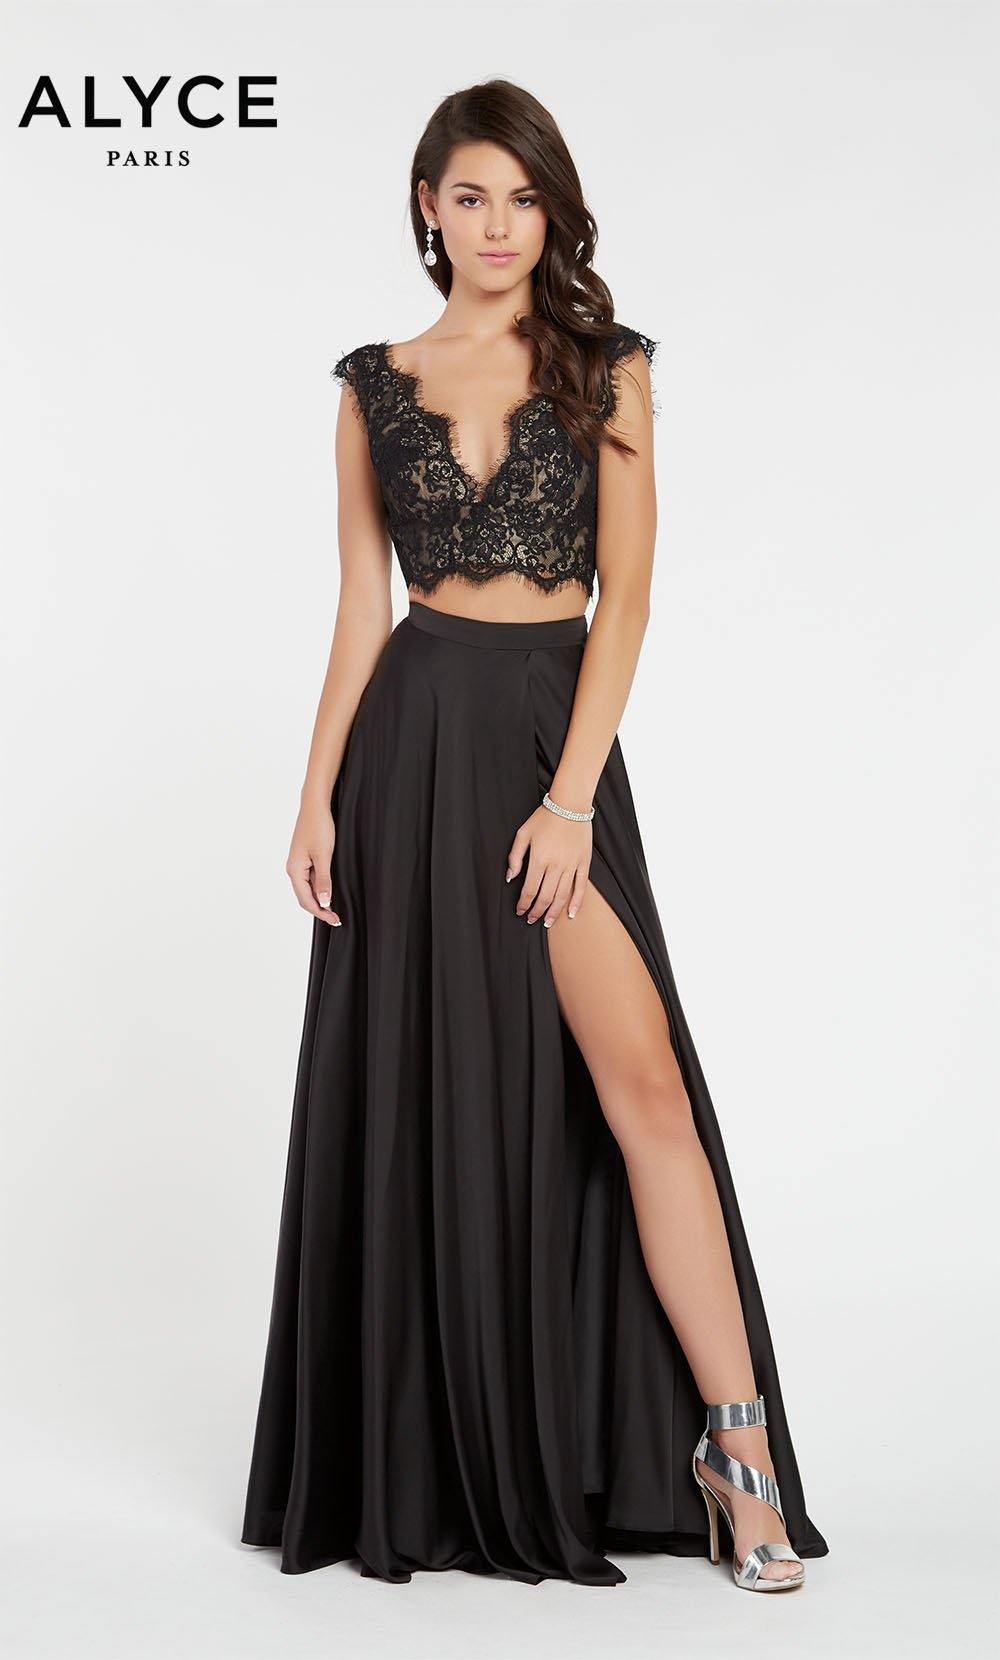 How to Choose a Prom Dress that Shows Off Your Assets - Alyce Paris